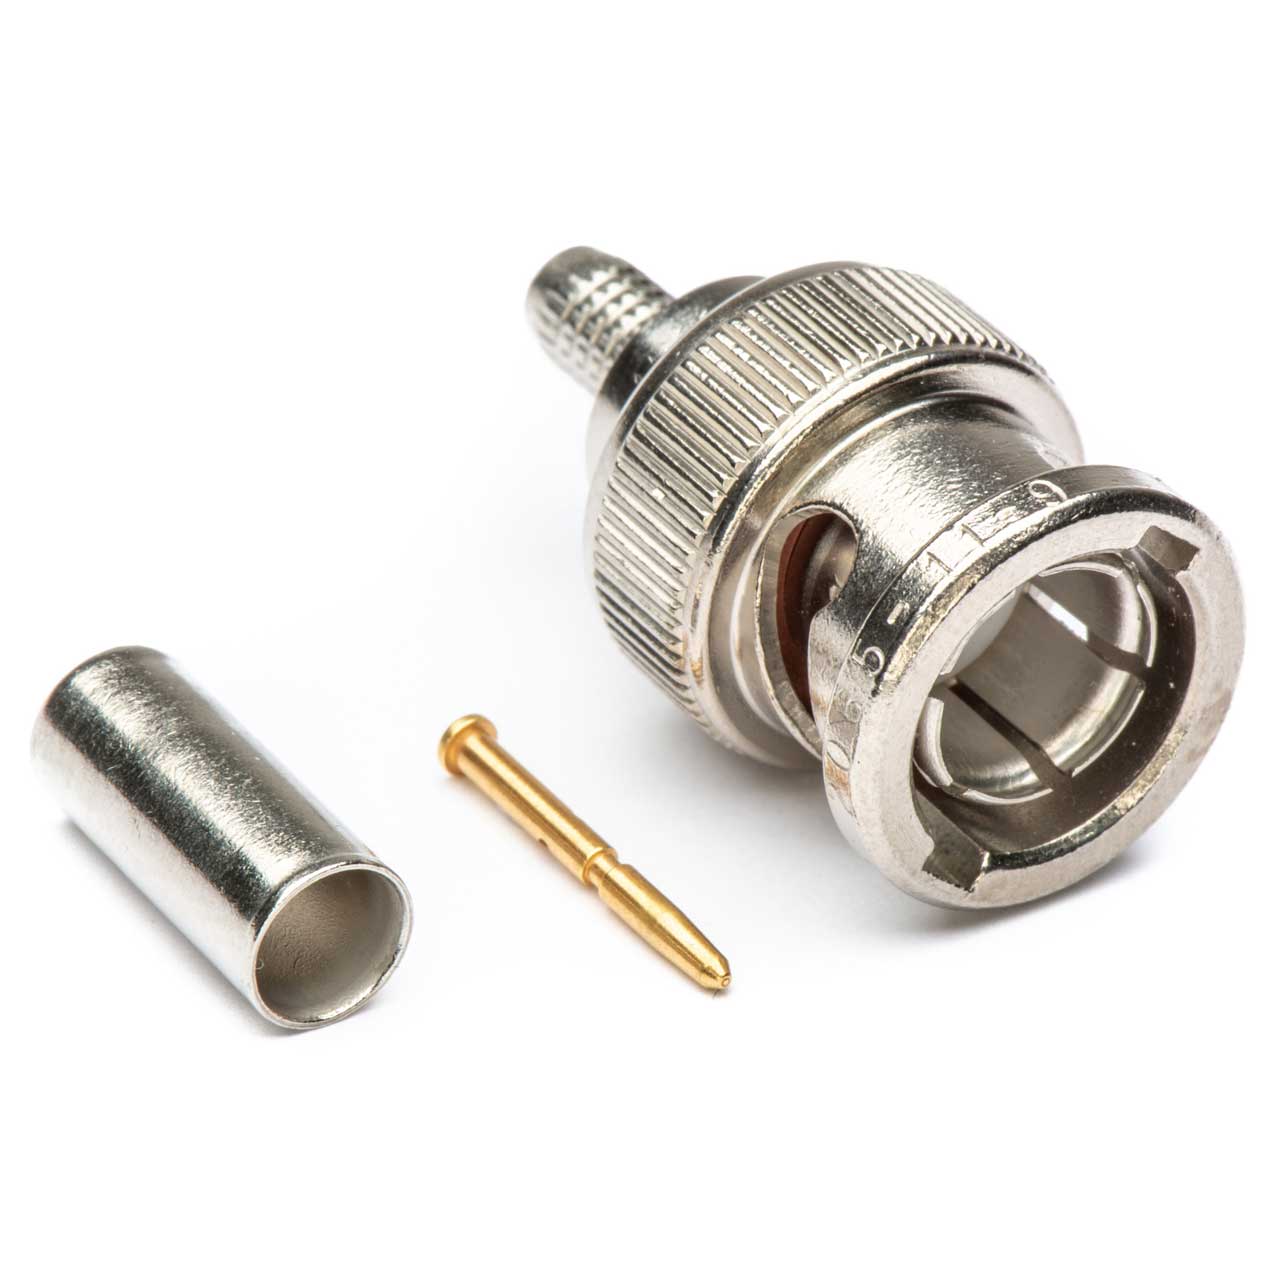 Kings 2065-11-9 3G BNC Connector for Belden 1855A & Gepco VDM230 Miniature RG59 Coaxial Cable